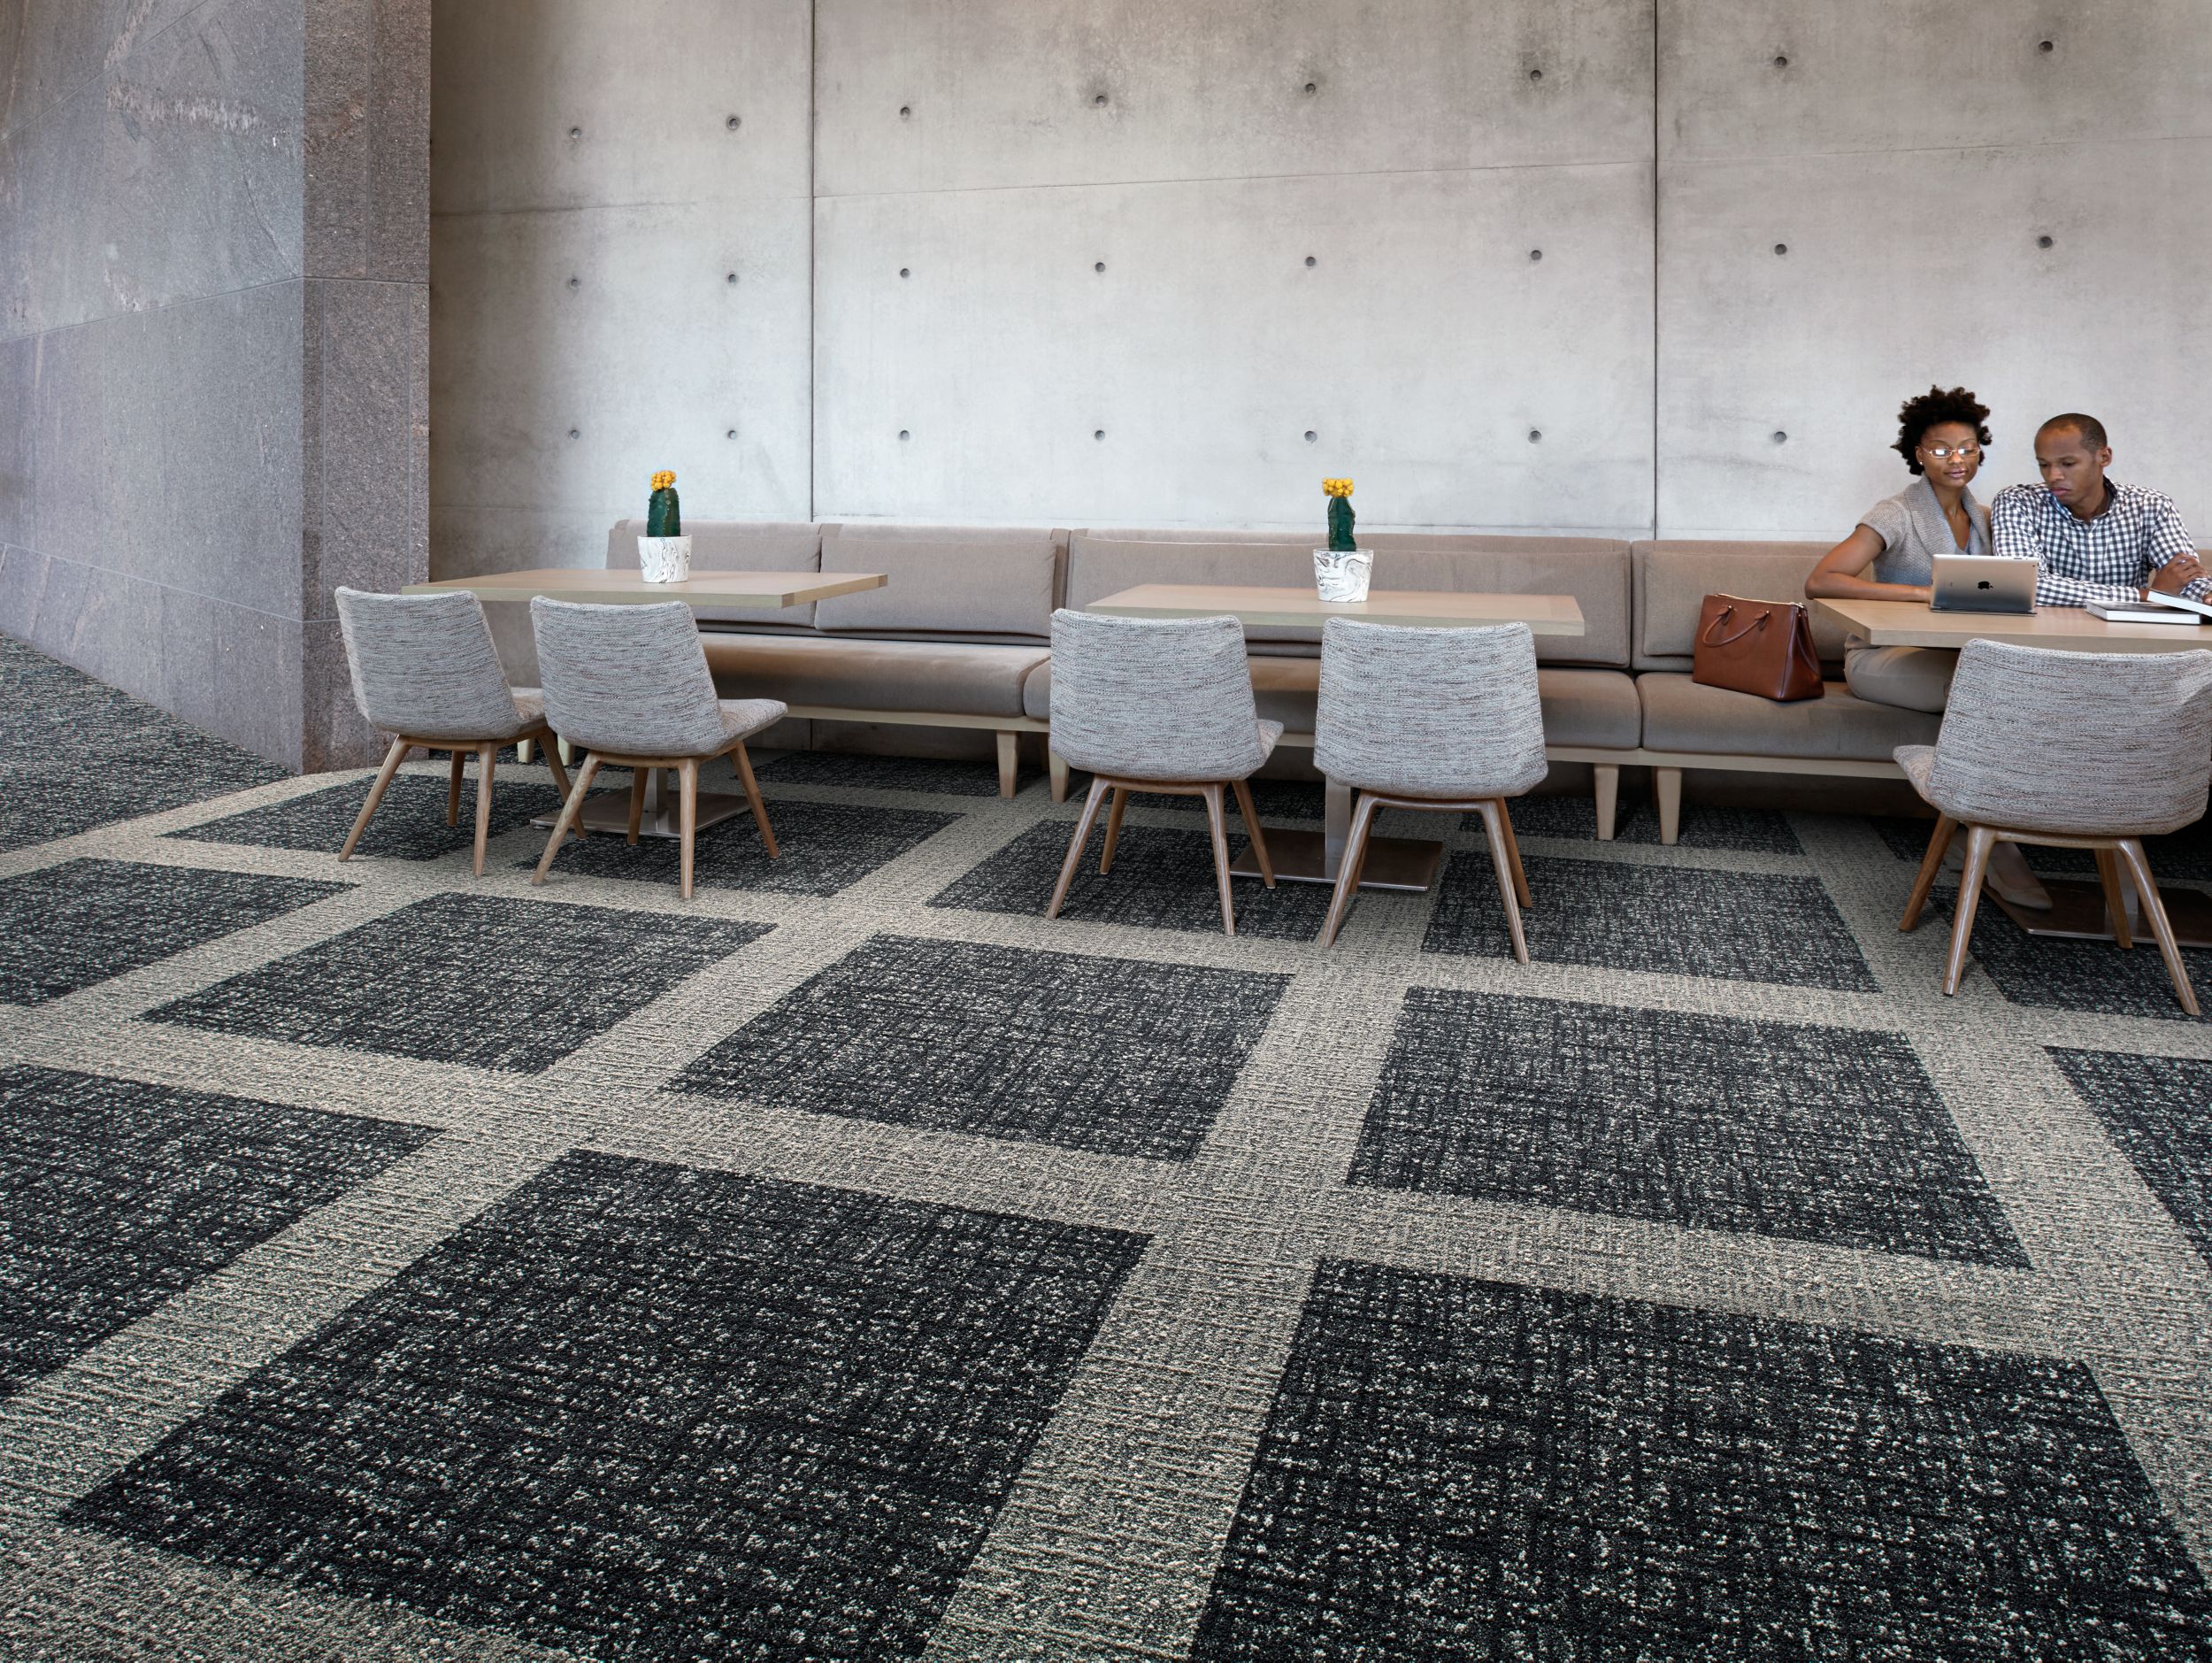 Interface WW895 plank carpet tile and Textured Woodgrains LVT in office common area with tables and chairs numéro d’image 6